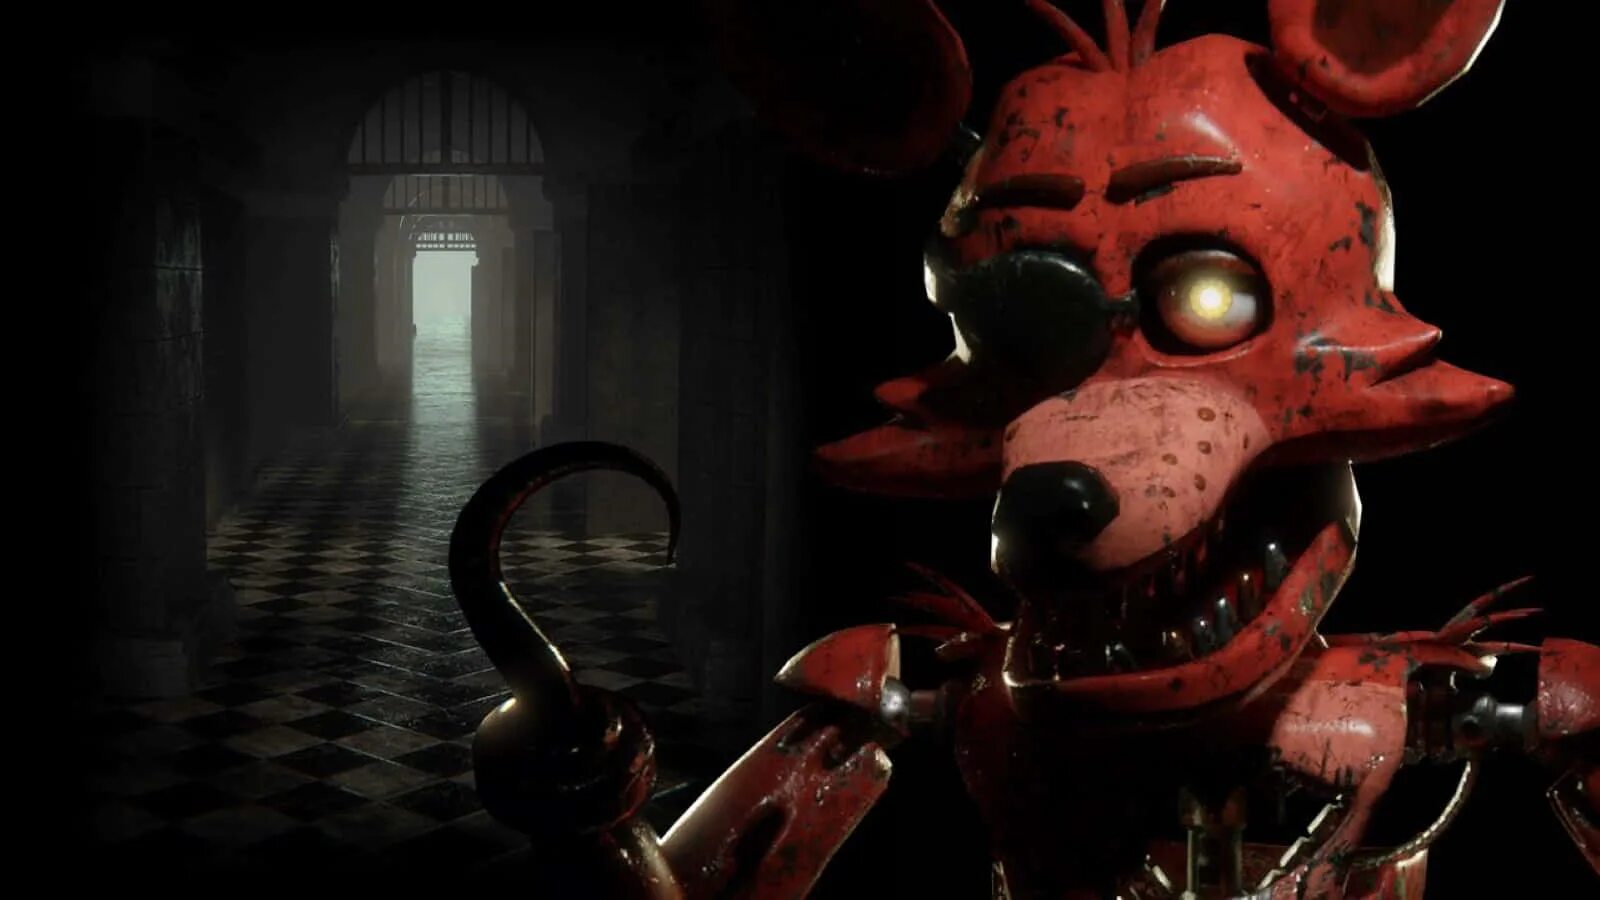 Five Nights at Freddy's Фокси. Five Nights at Freddy's 2 Фокси. АНИМАТРОНИКИ Фокси. Five Nights at Freddy's 1 Фокси.